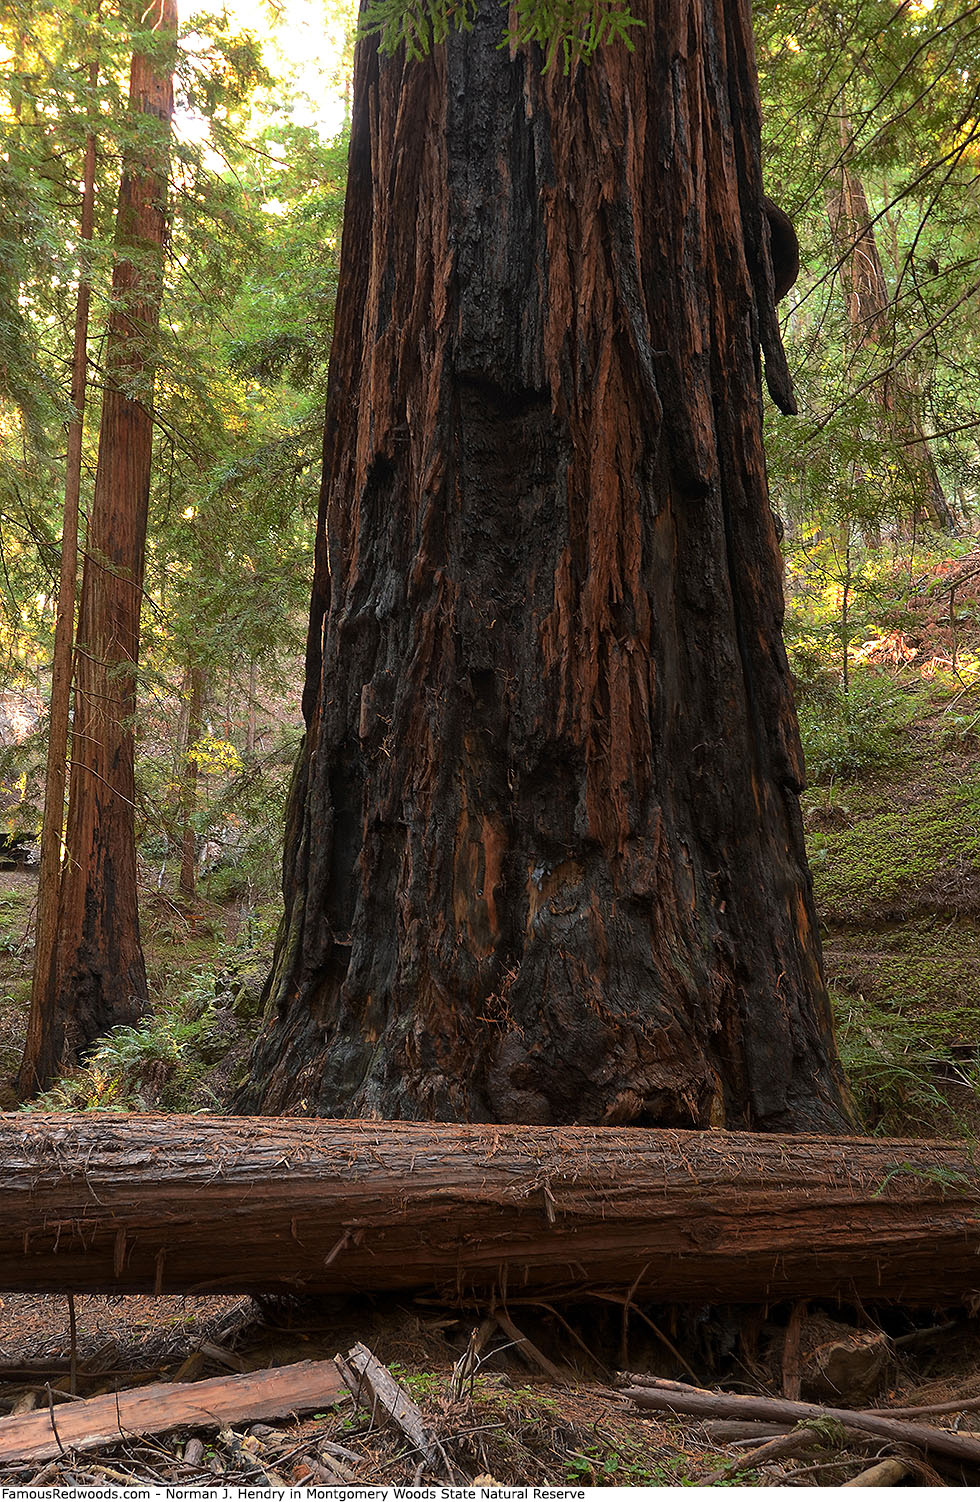 Montgomery Woods State Natural Reserve - Norman J. Hendry Tree